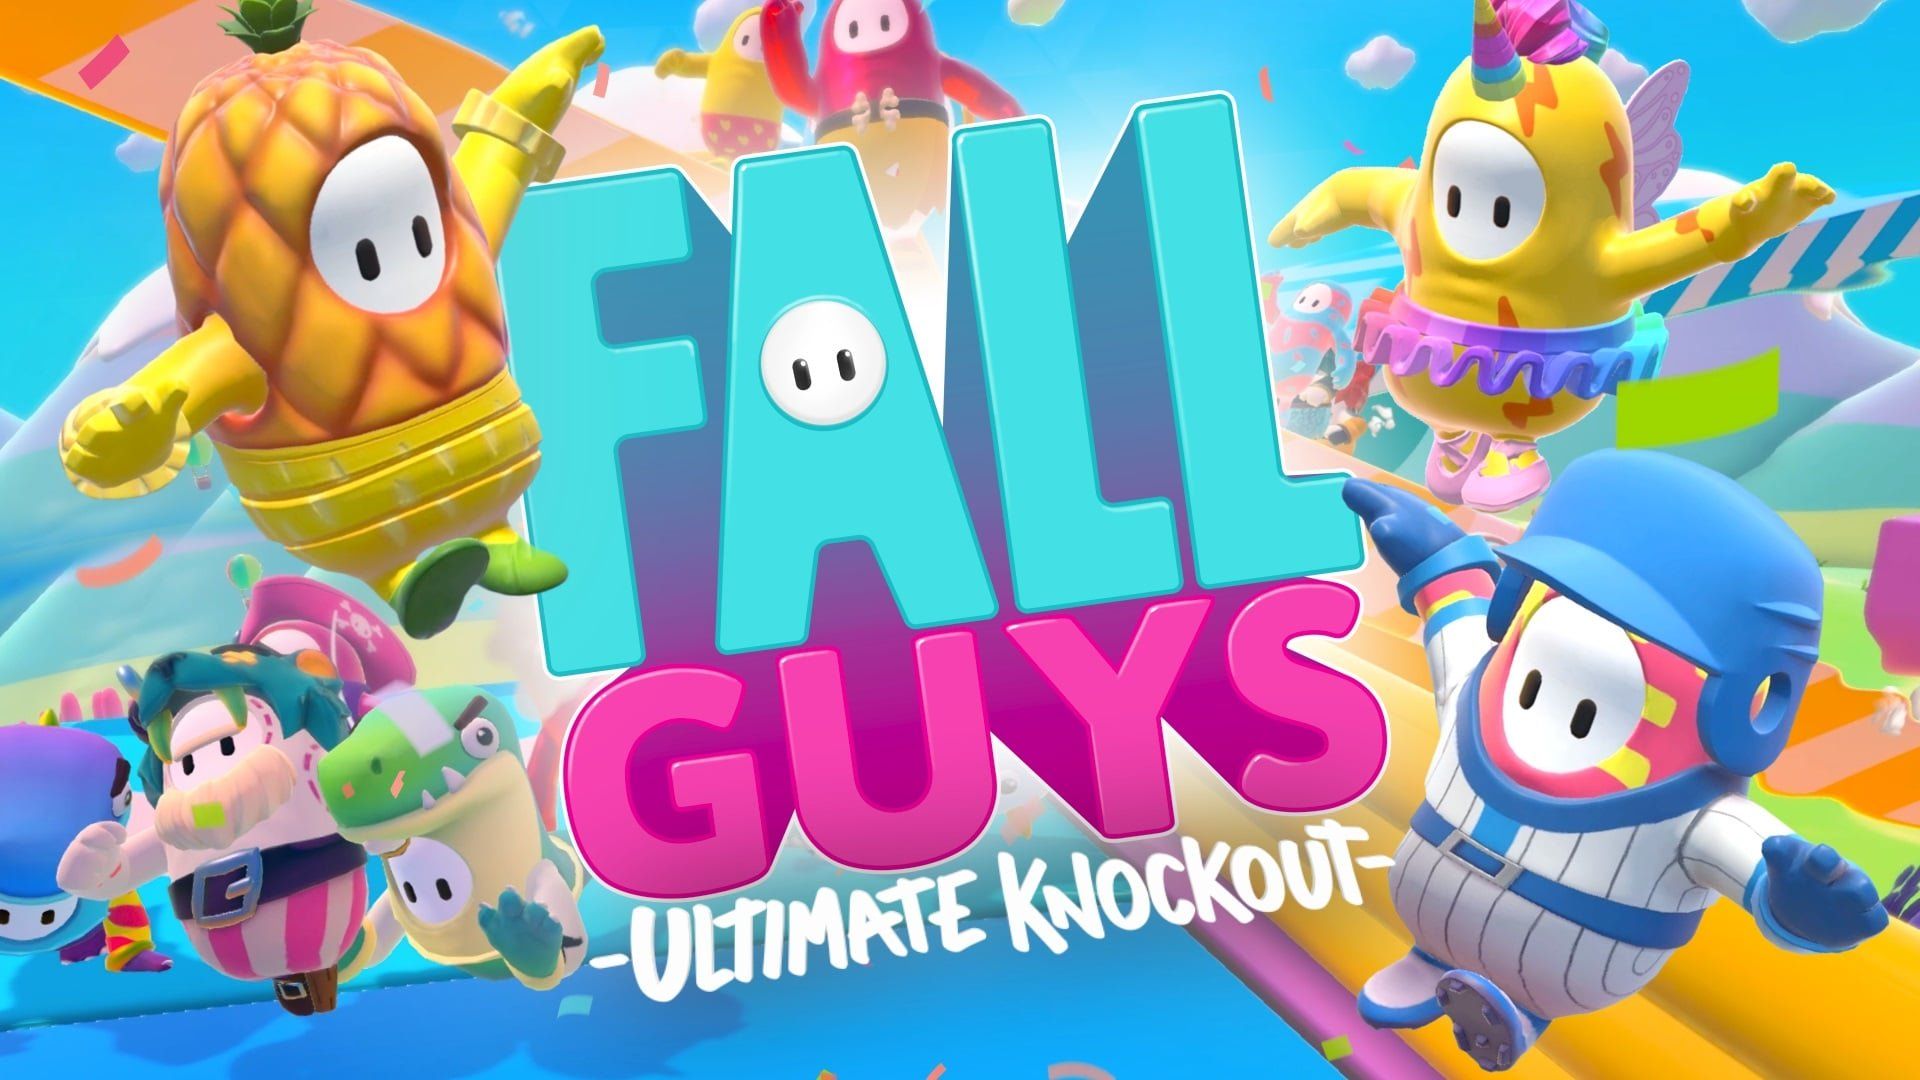 Download Fall Guys Ultimate Knockout Video Game Wallpaper 71438 1920x1080 px High Definition Wallpaper